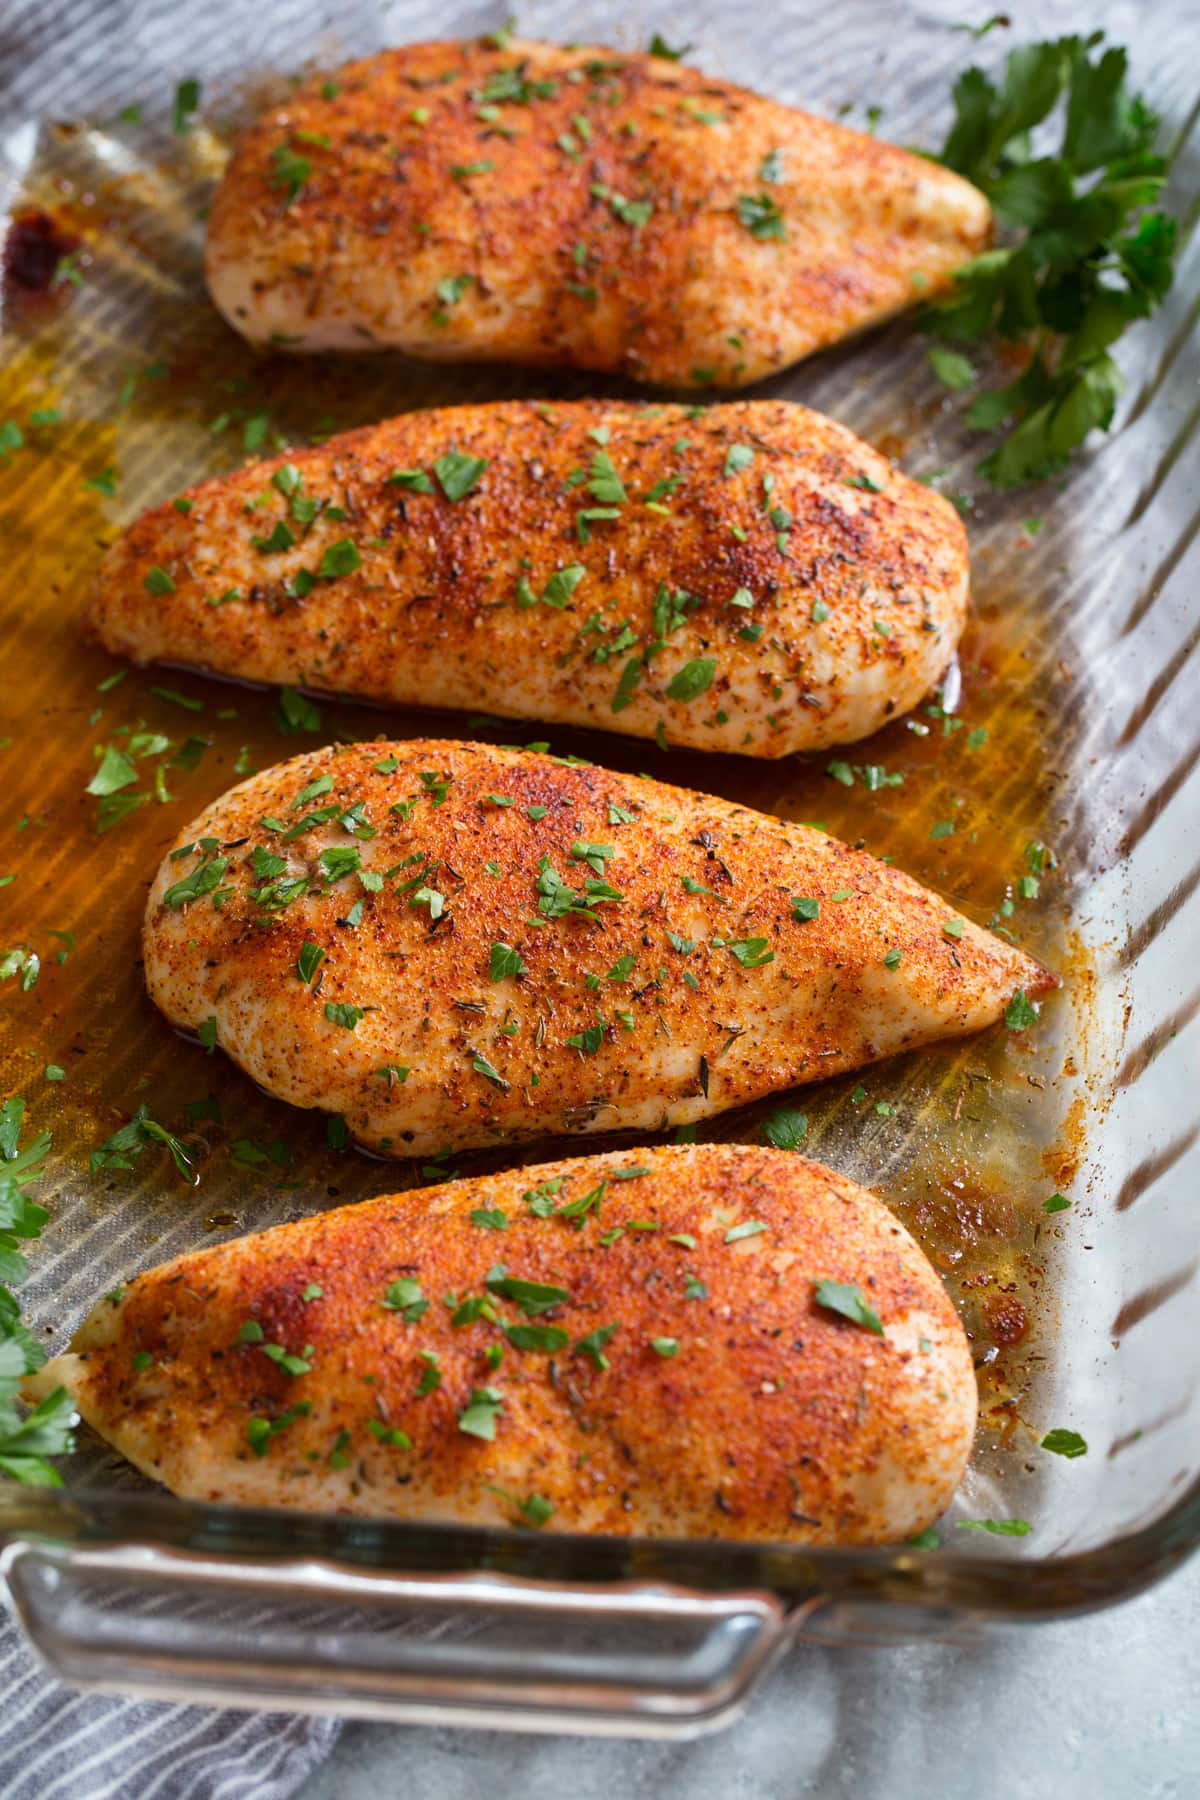 Baking Times for Chicken Breasts Lovely Baked Chicken Breast Easy Flavorful Recipe Cooking Classy